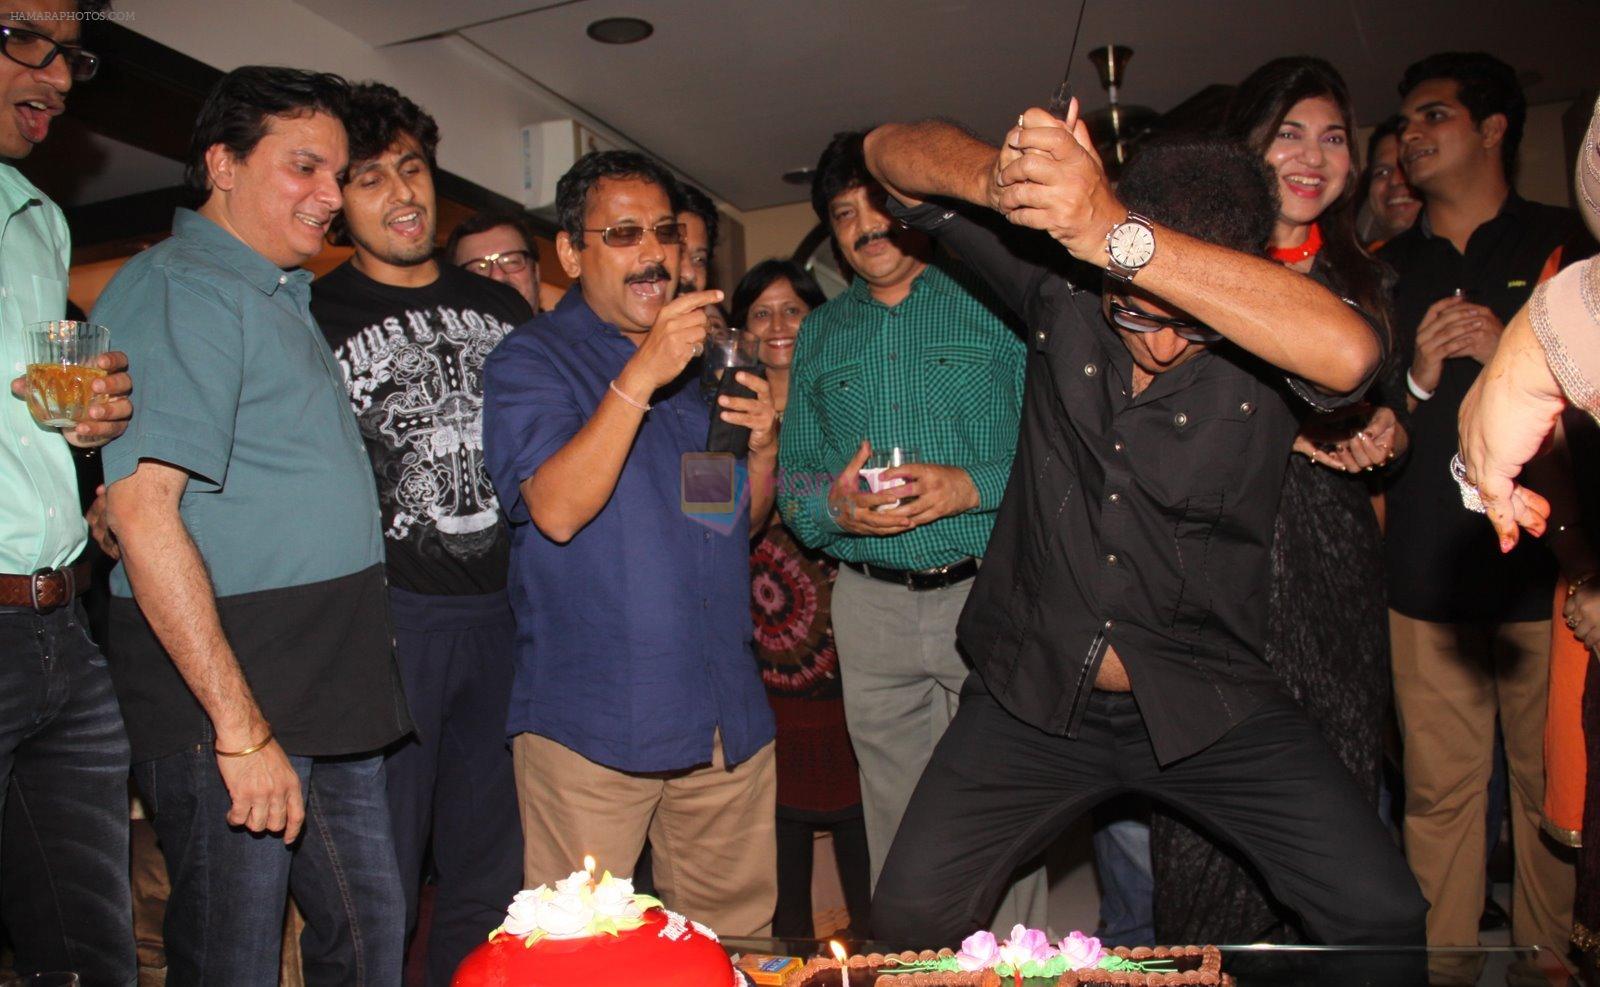 Cake Cutting at Abhijeet Bhattacharya's birthday party on 30th October 2013